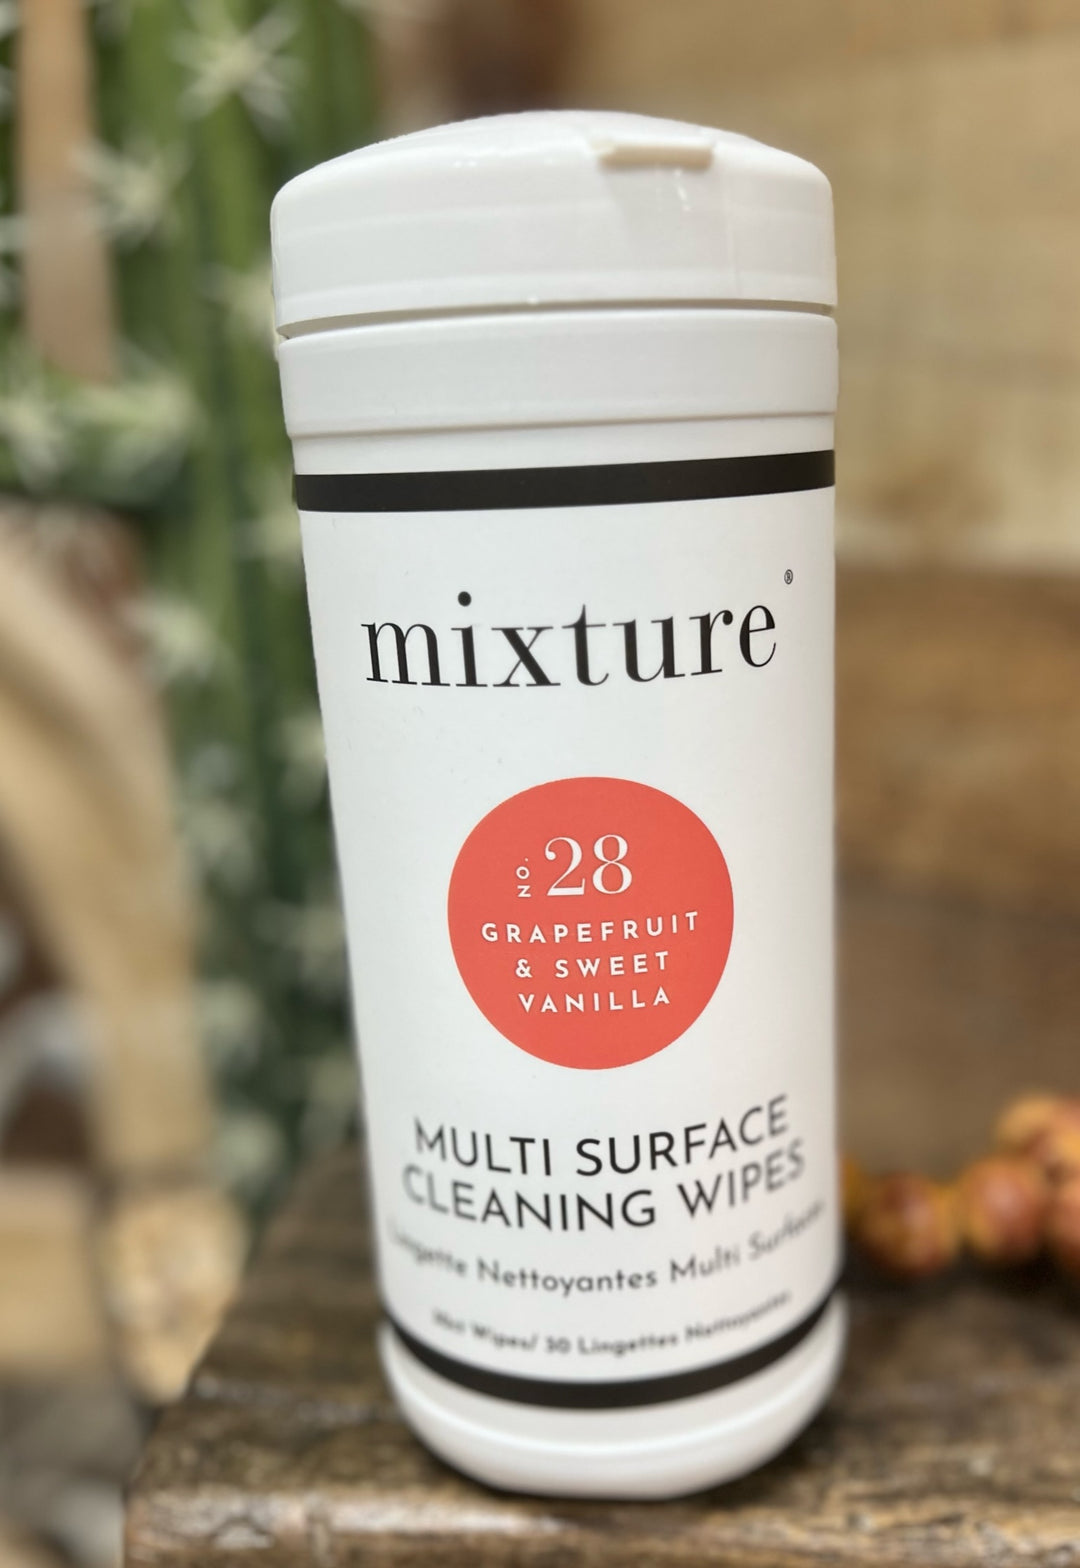 Mixture Multi Surface Cleaning Wipes